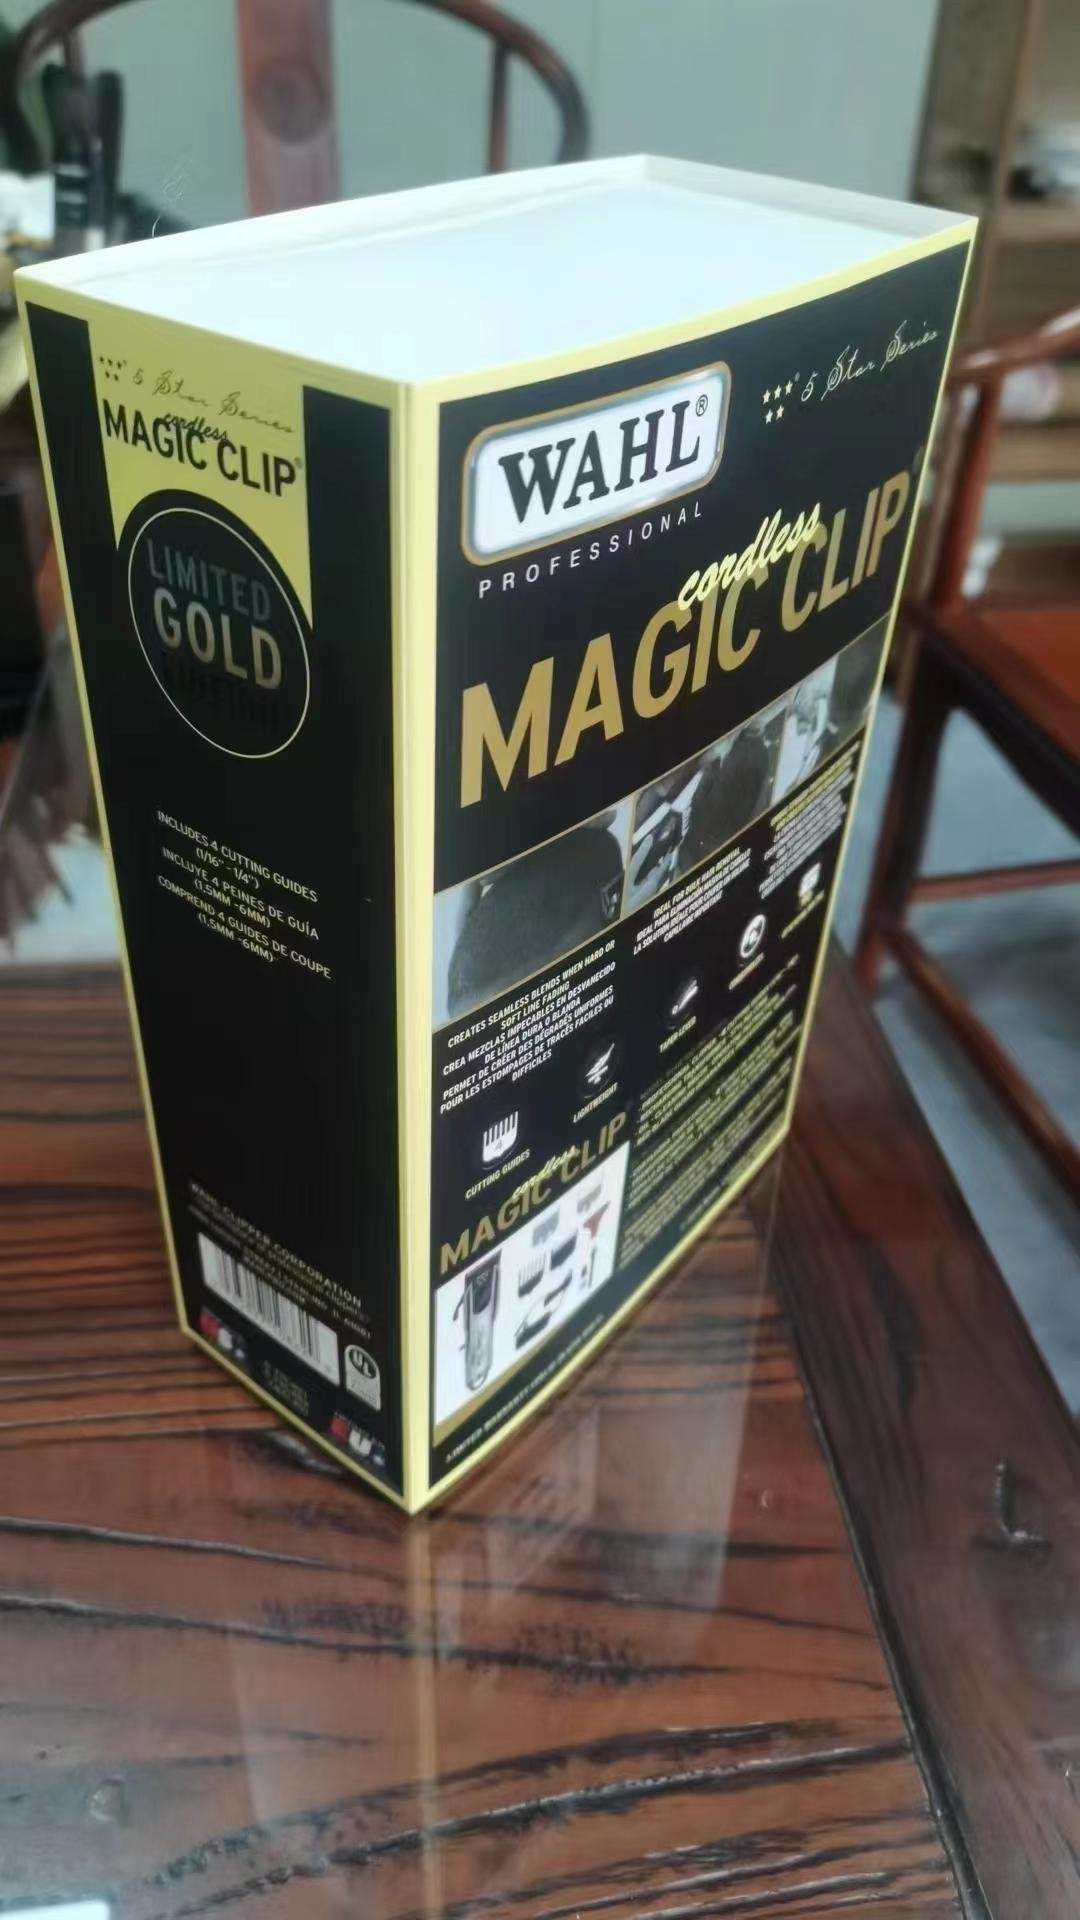 Wahl Professional 5 Star Limited Edition Gold Cordless Magic Clip 8148 4